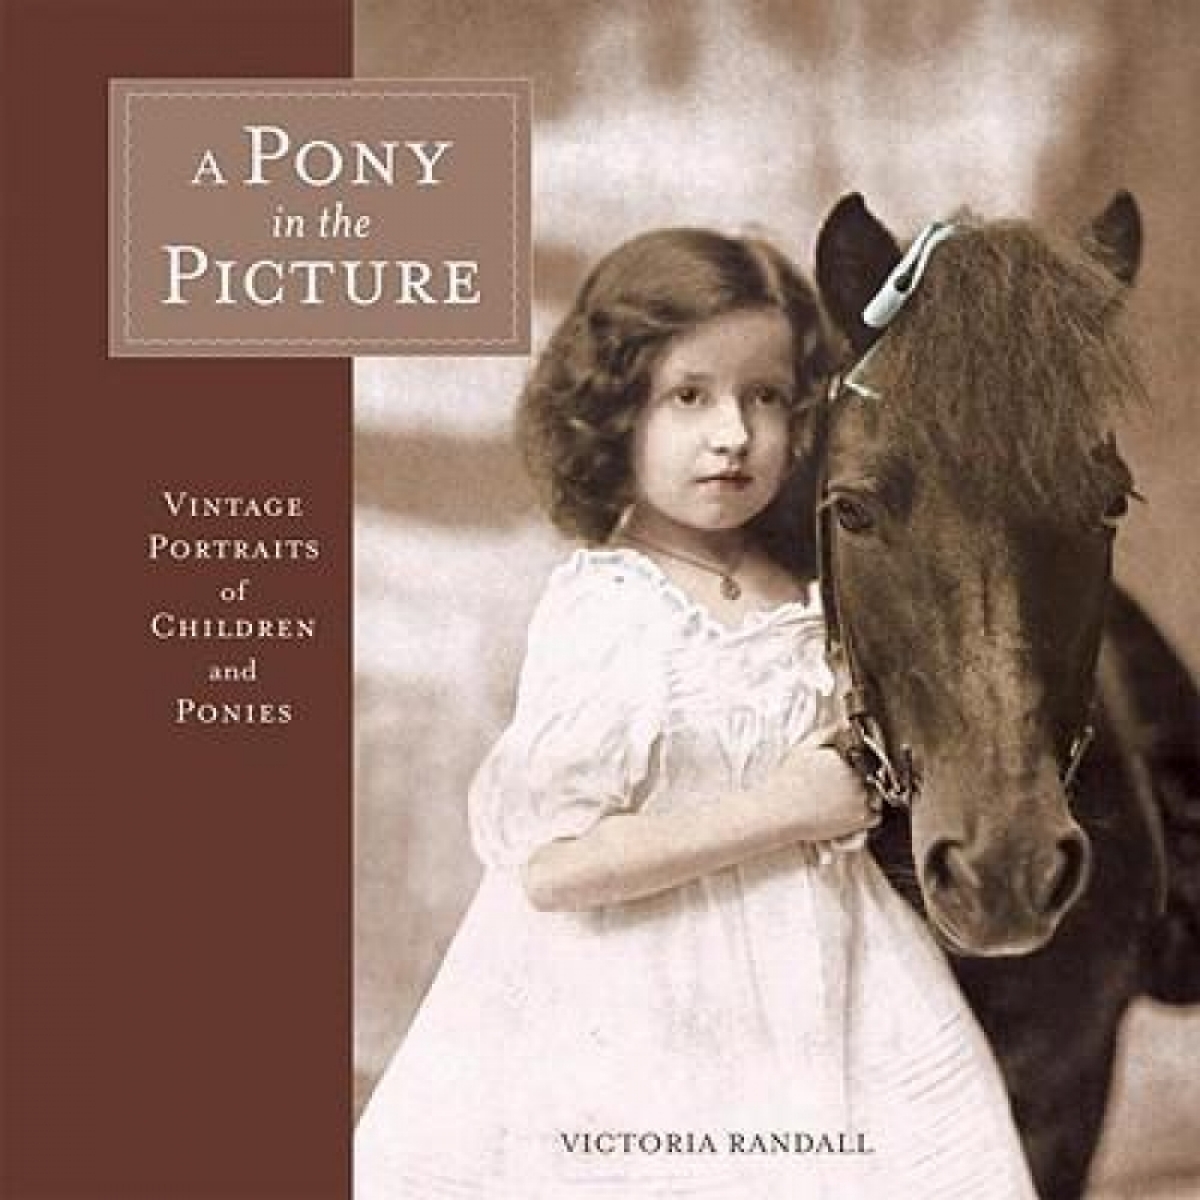 Randall V. A Pony in the Picture. Vintage Portraits of Children and Ponies 